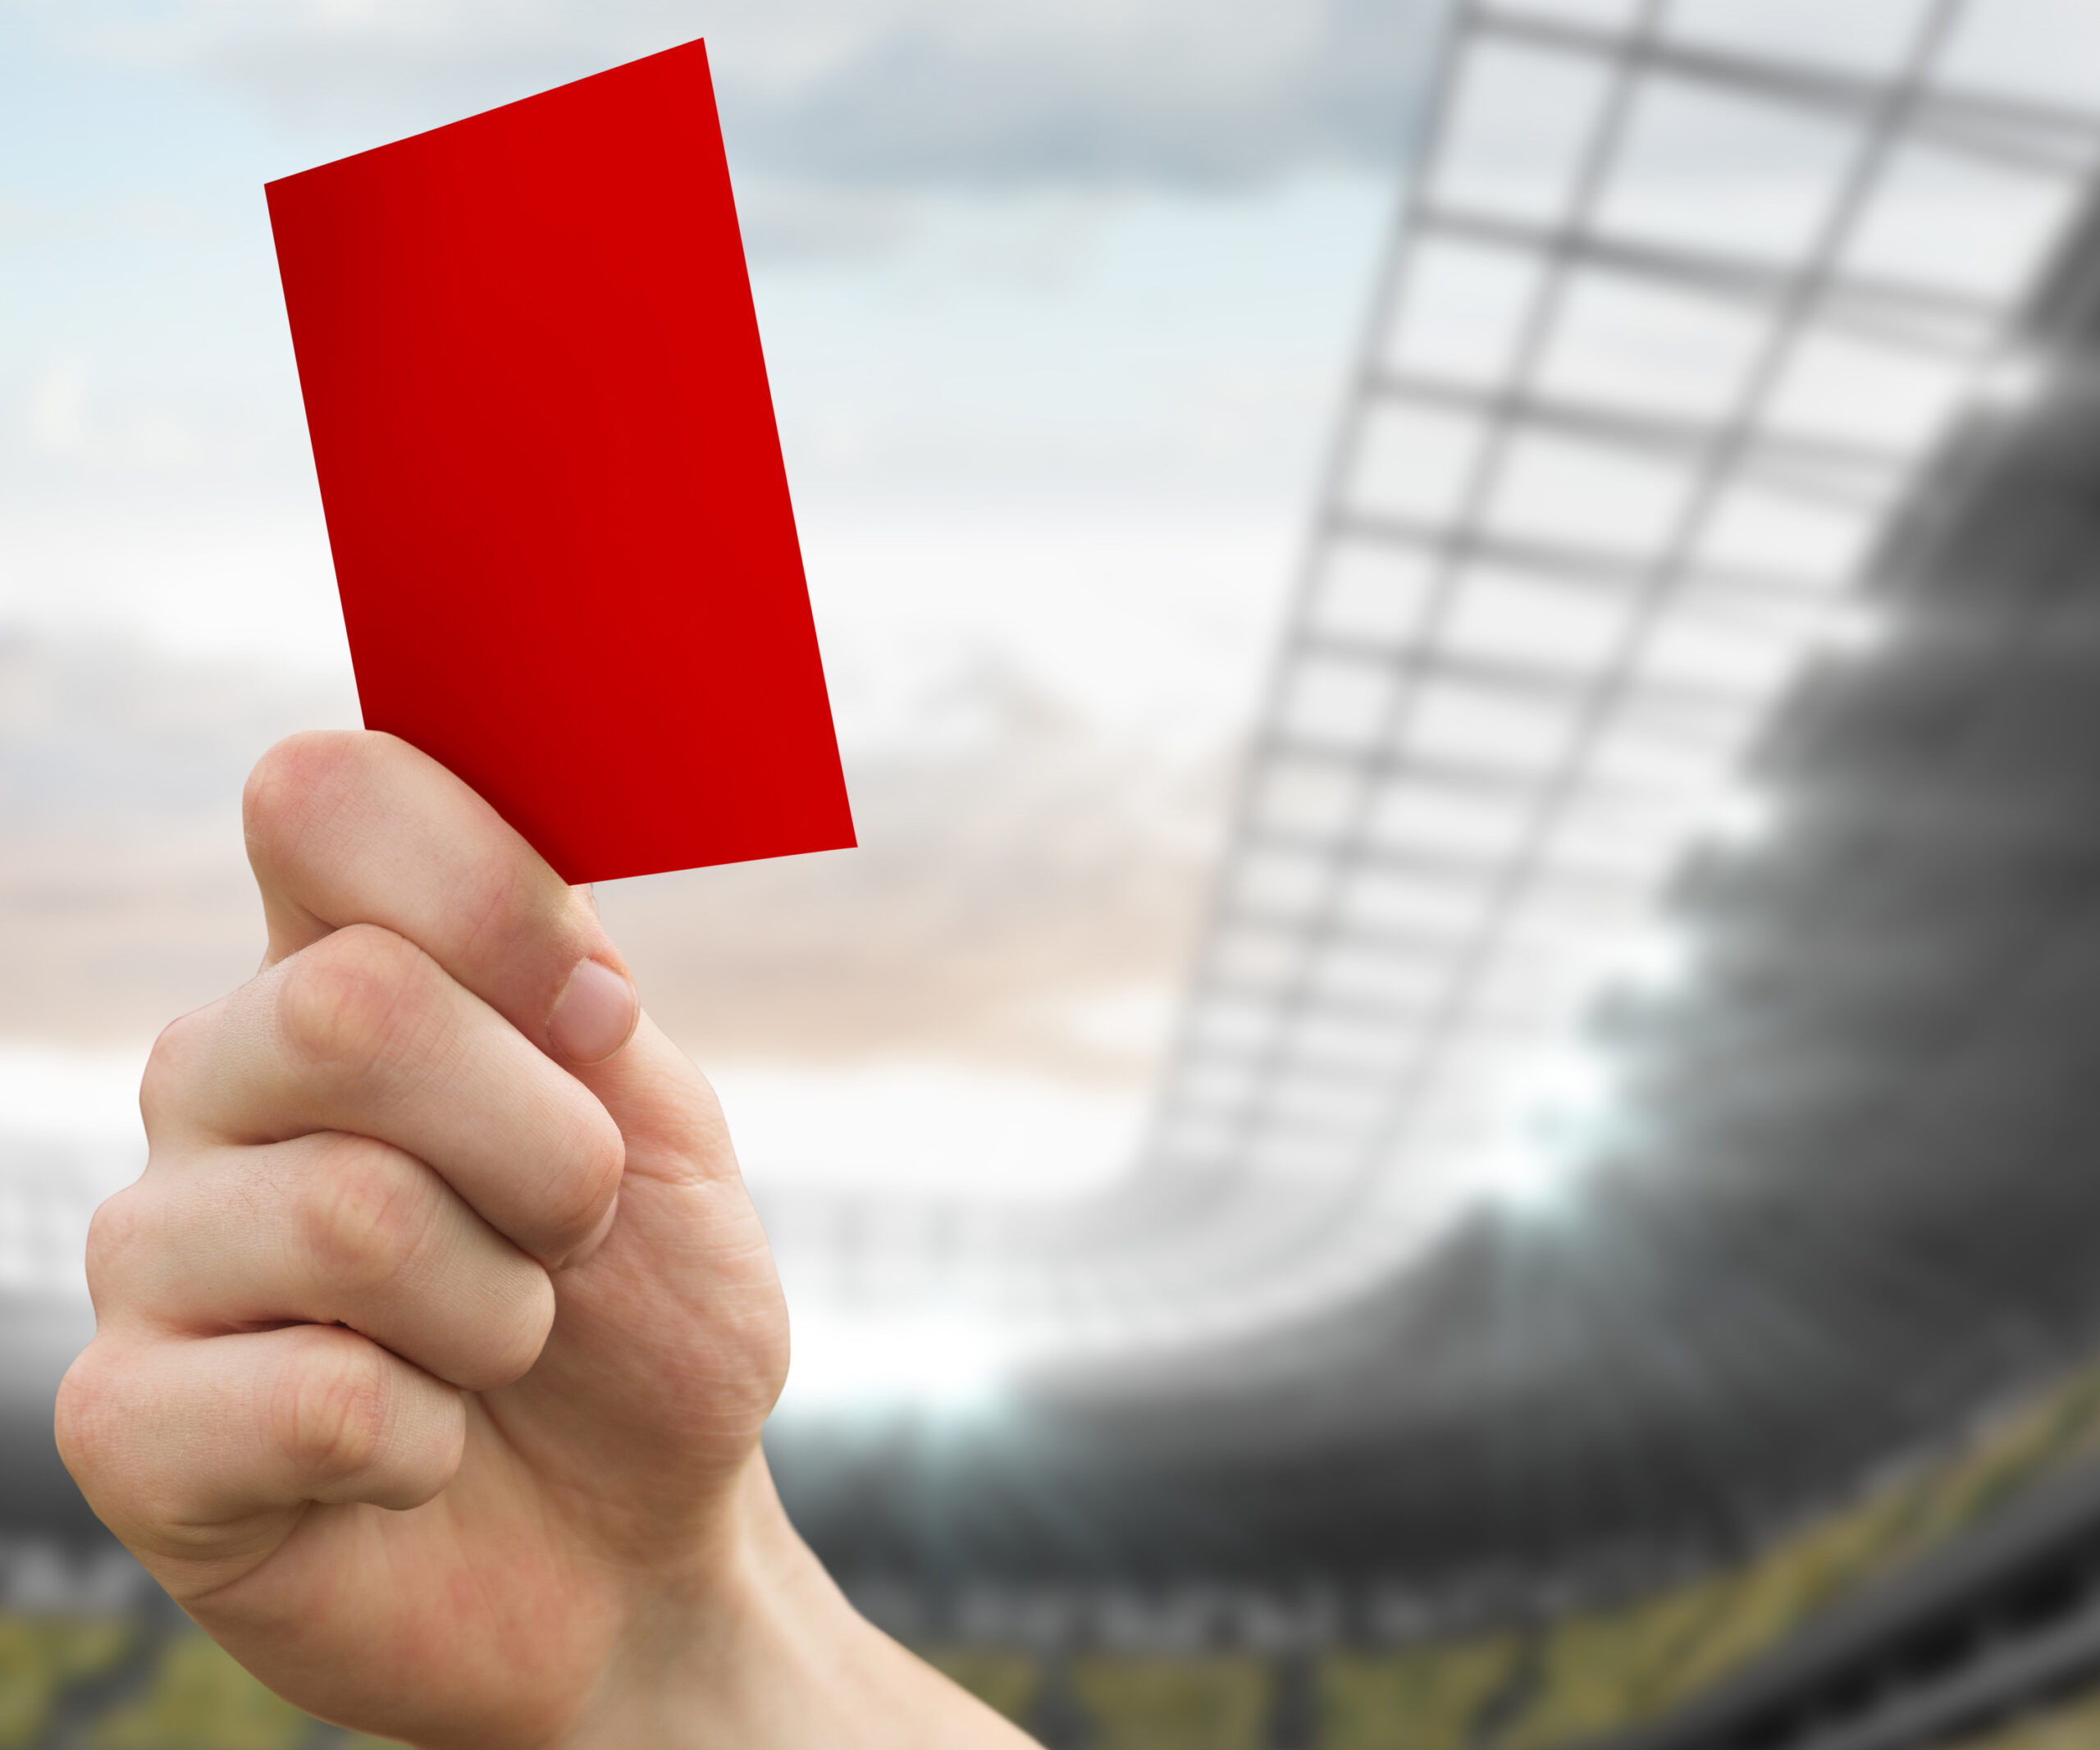 Football referee shot dead after issuing red card